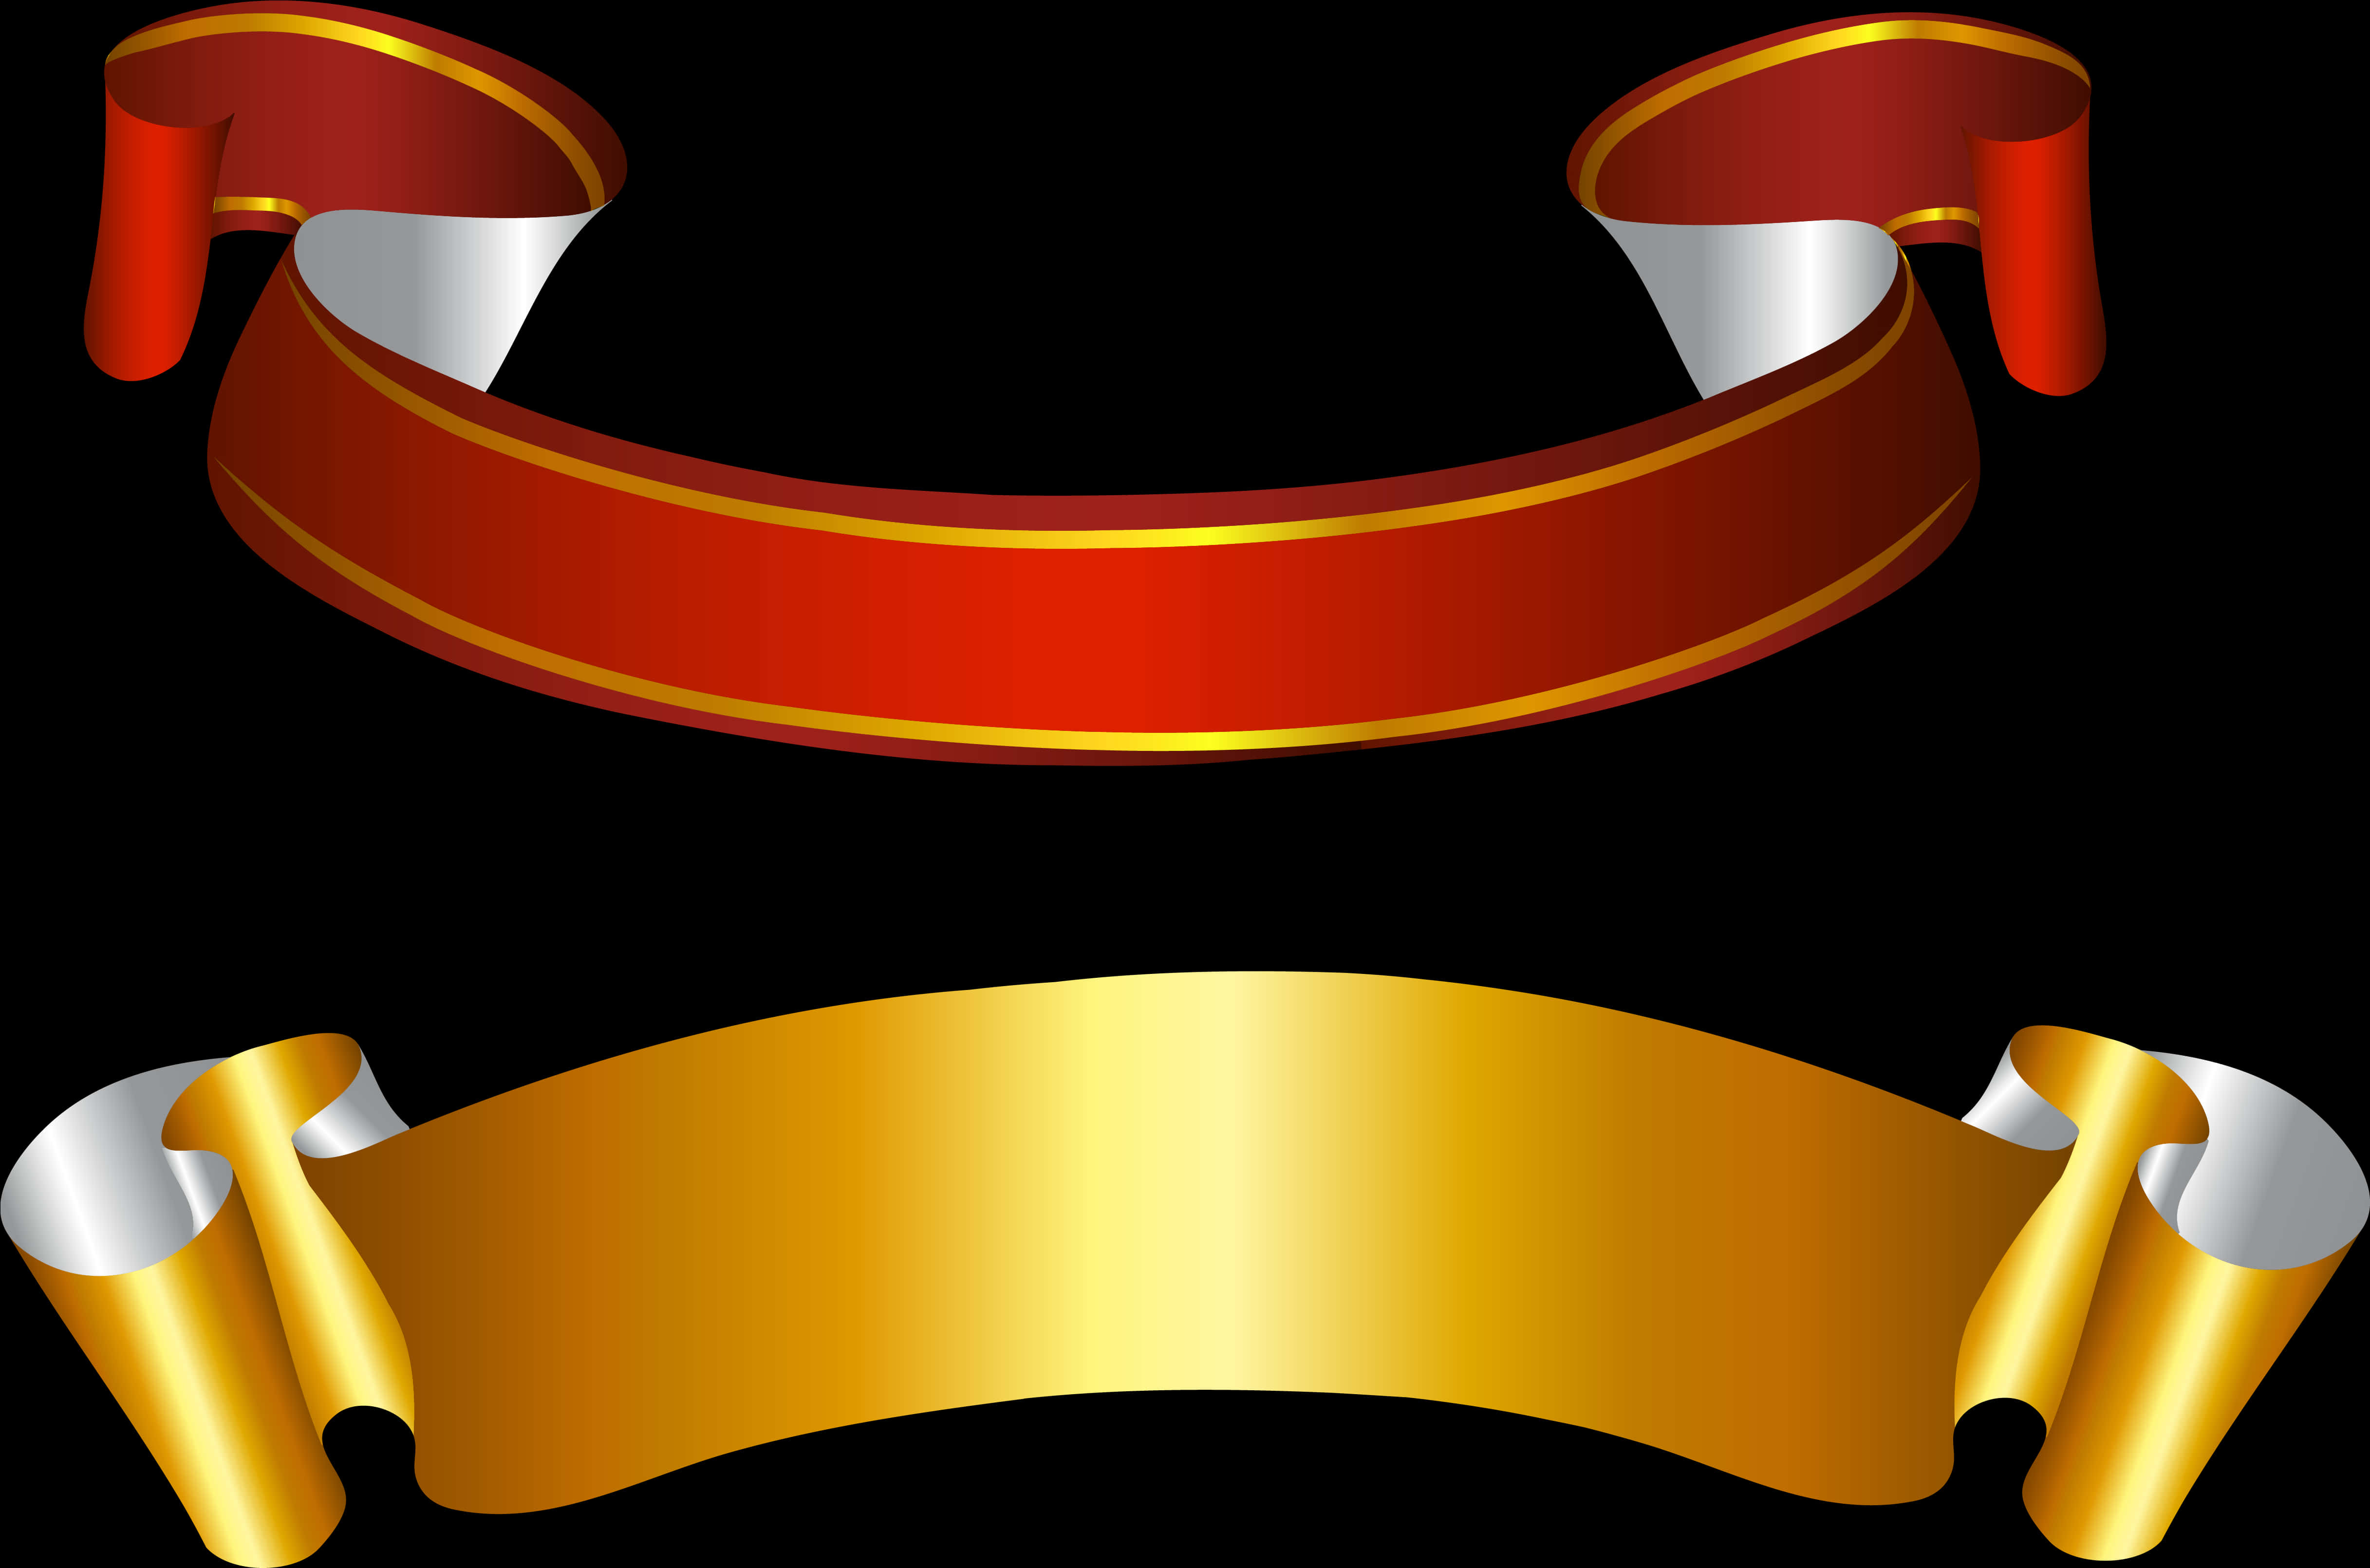 Redand Gold Banner Ribbons